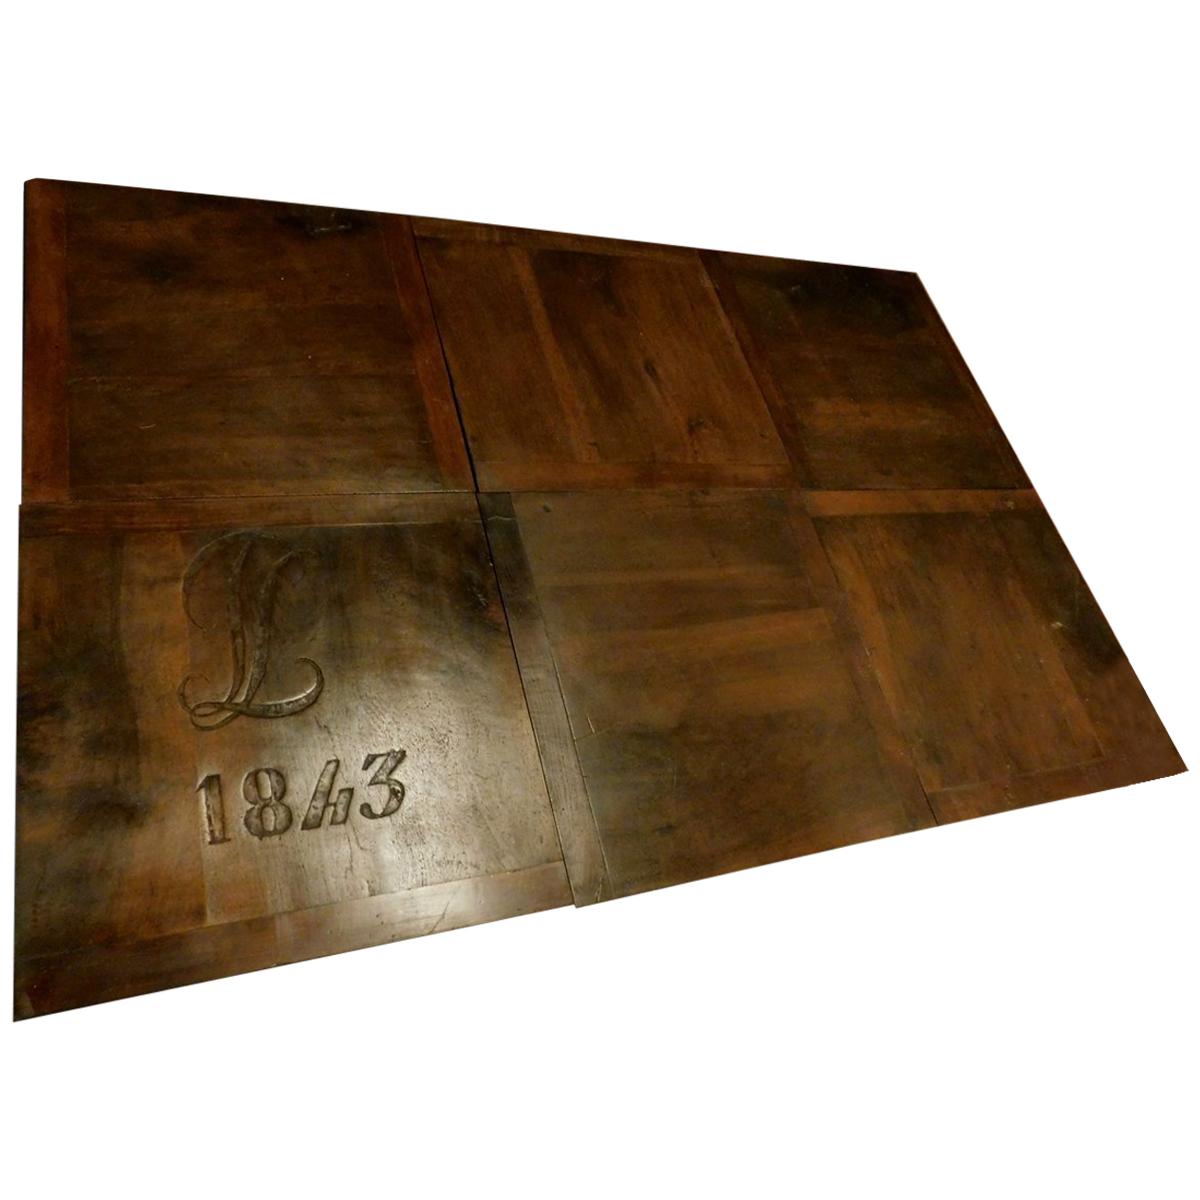 Antique Wood Walnut Floor Dated 1843, Perfect and Original Patina